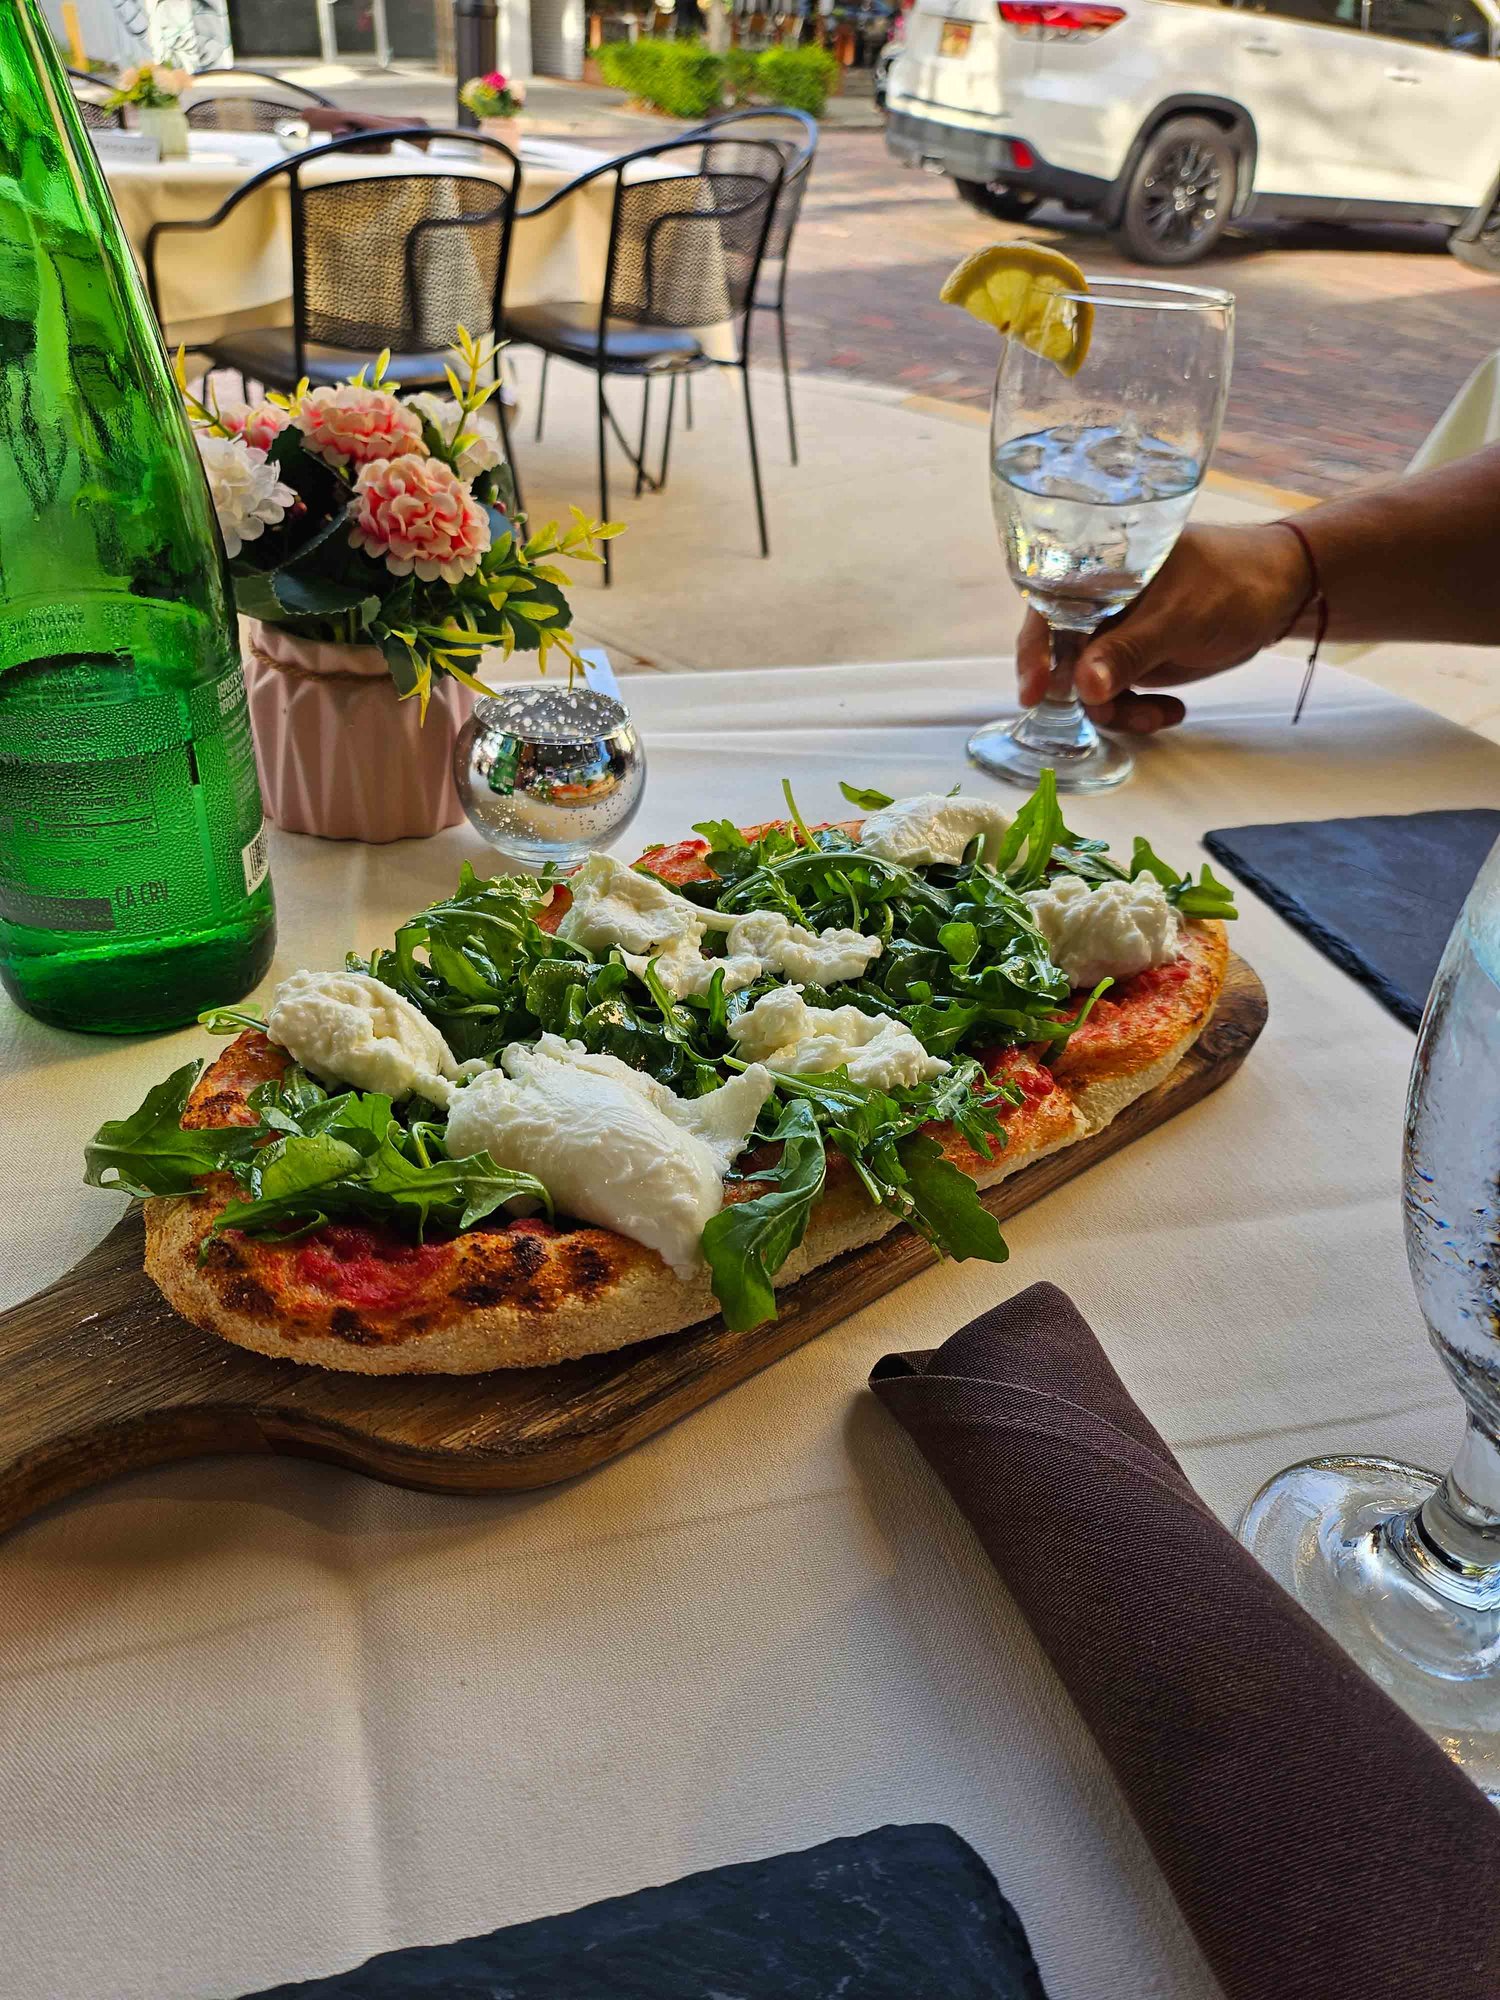 table with white tablecloth and flatbread with leafy greens and cheese